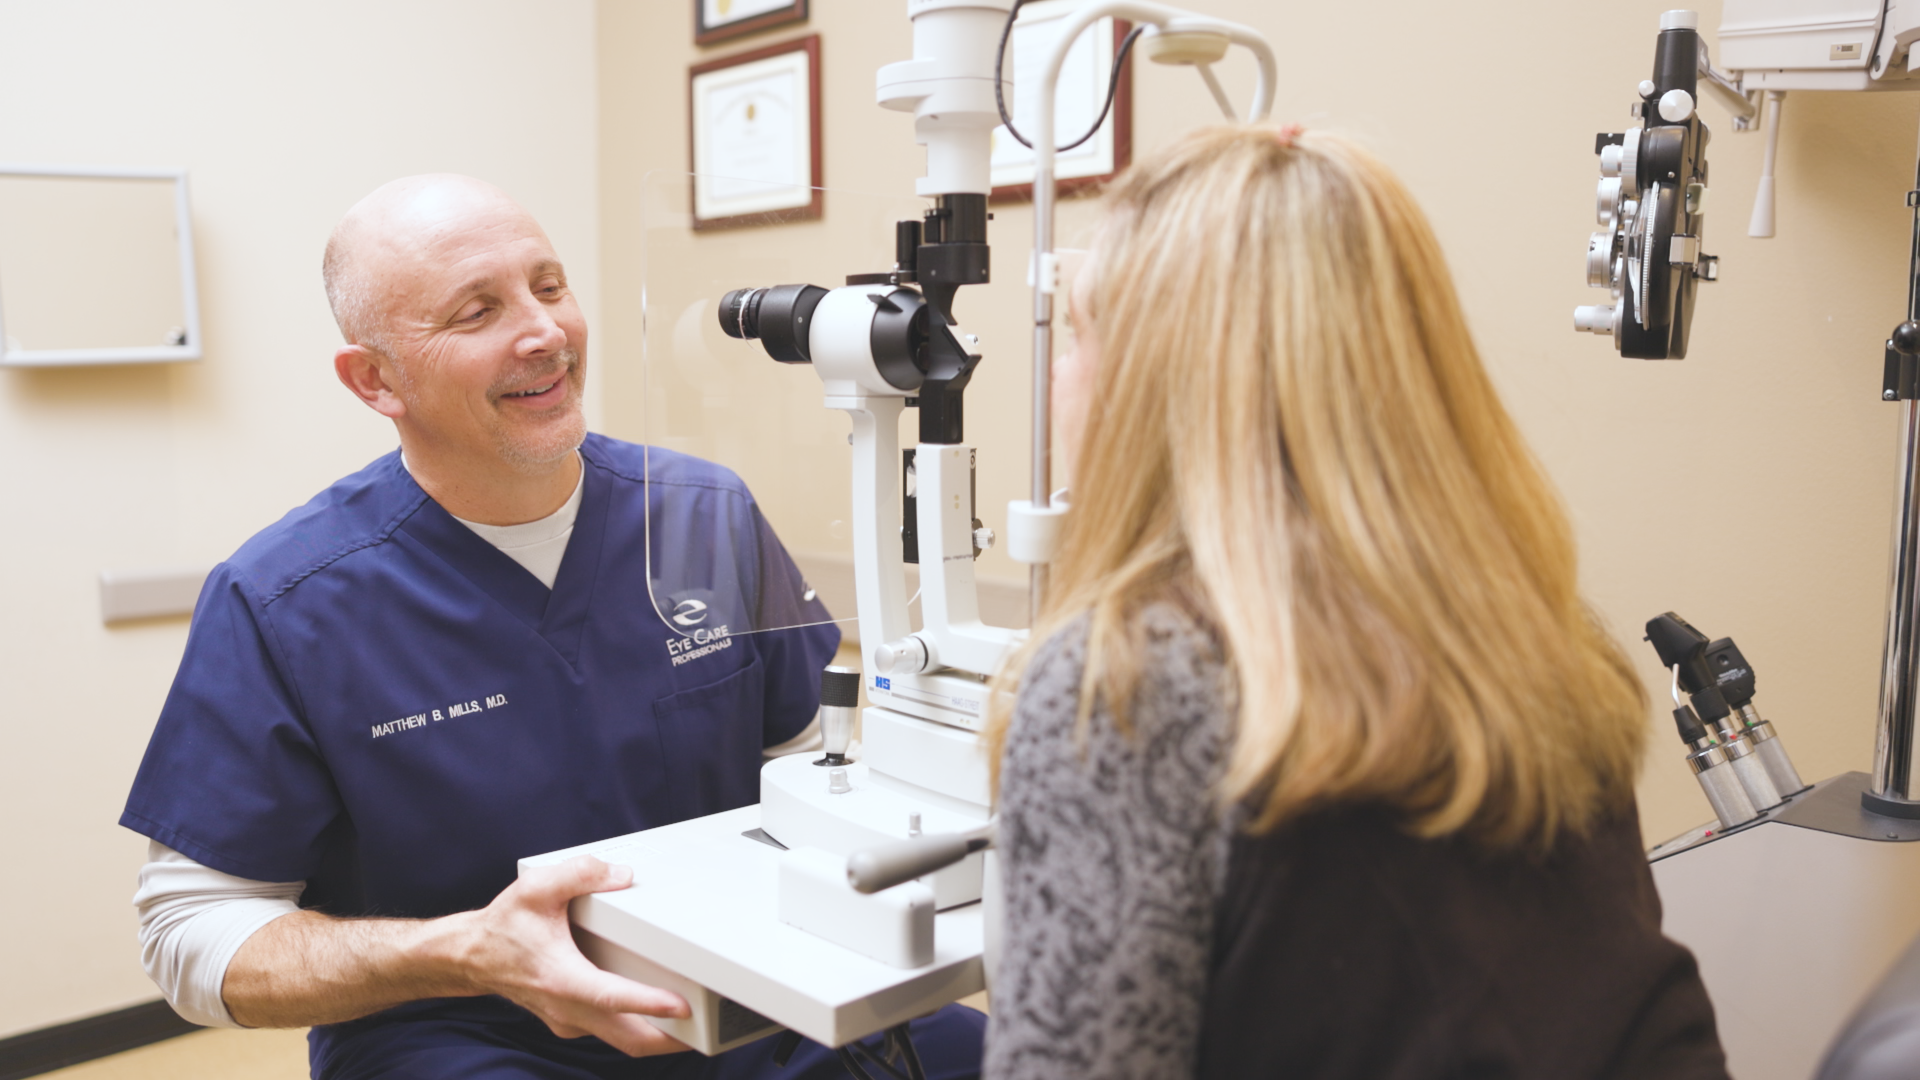 Dr. Matthew Mills, MD of Eye Care Professionals in Reno examines an eye patient